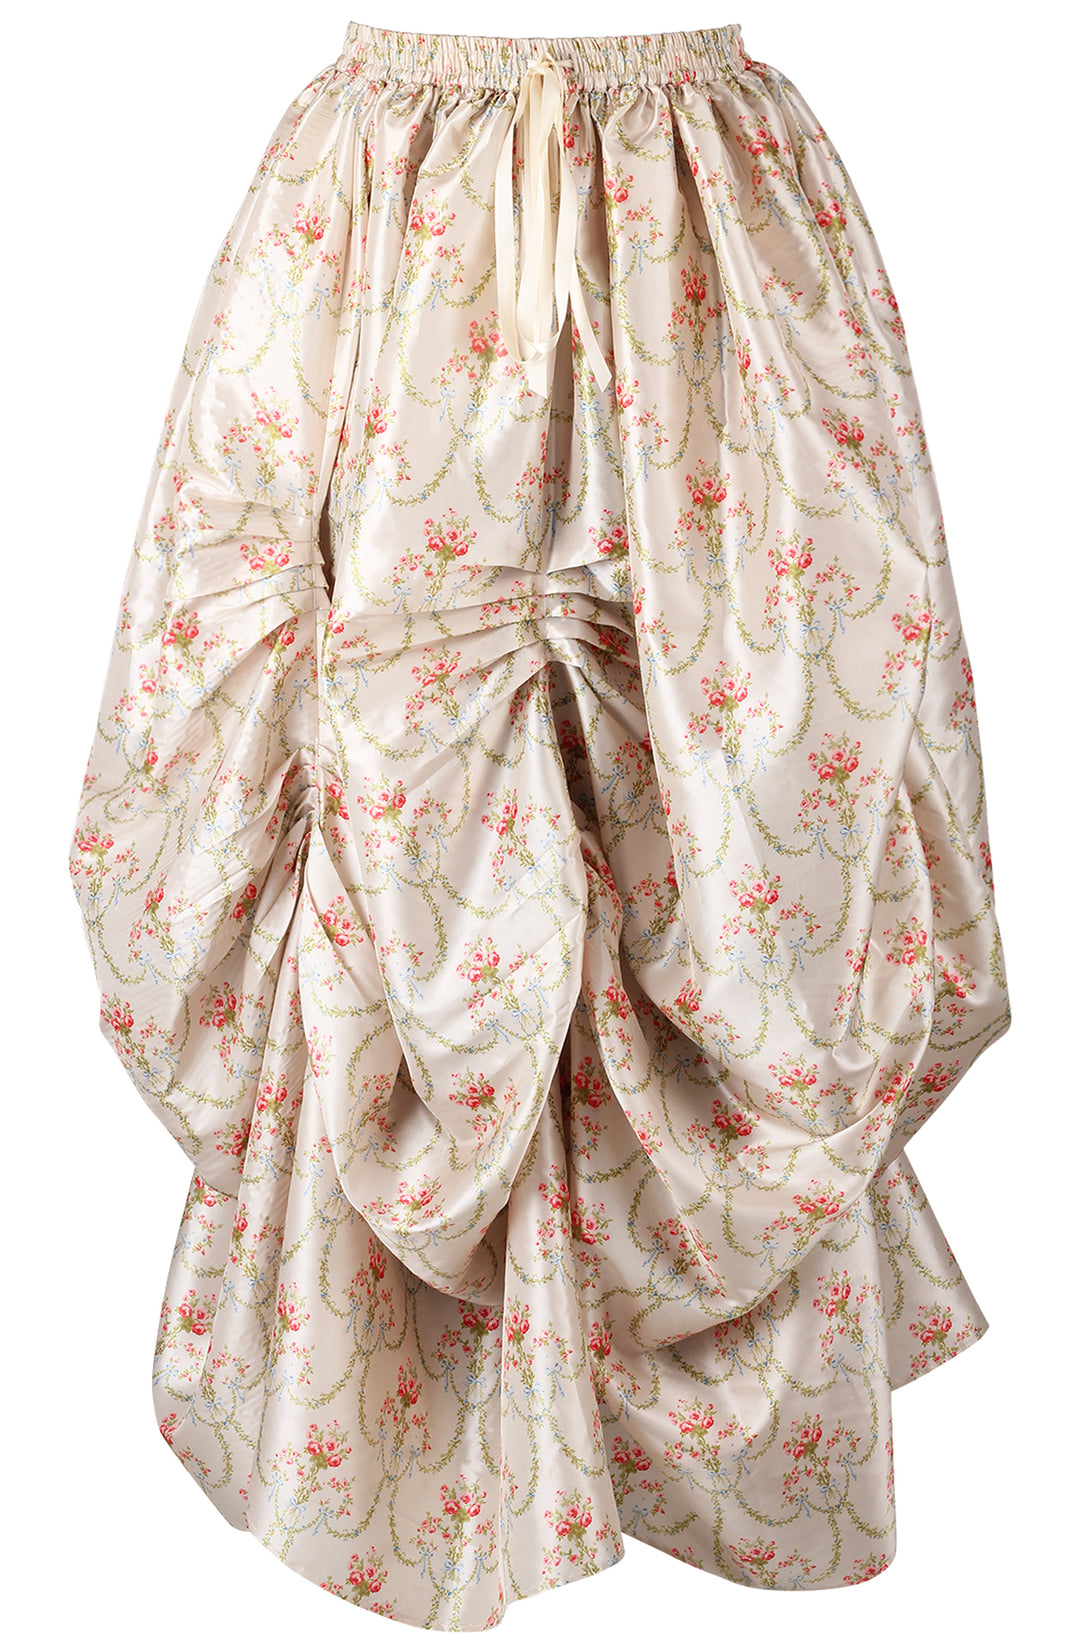 Floral Ball Gown Skirt - French Petit Garden 